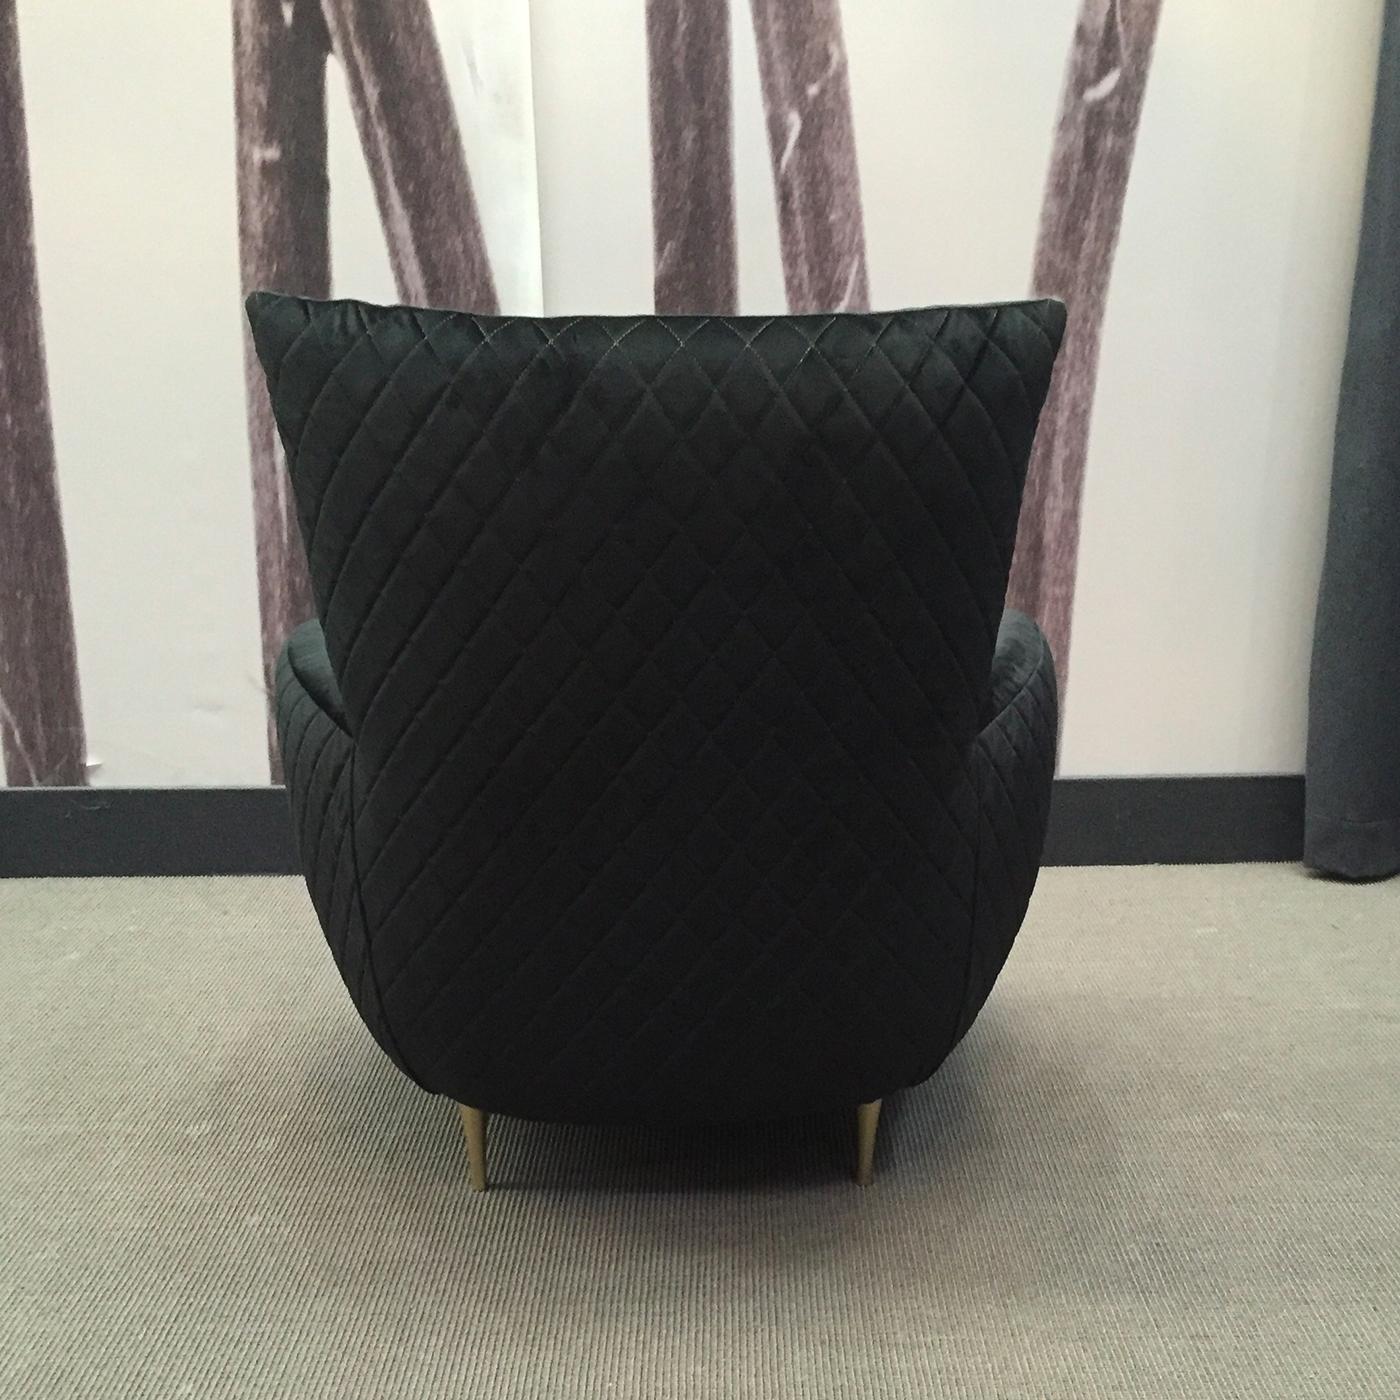 Pank Armchair by Andrea Vecera #3 In New Condition For Sale In Milan, IT